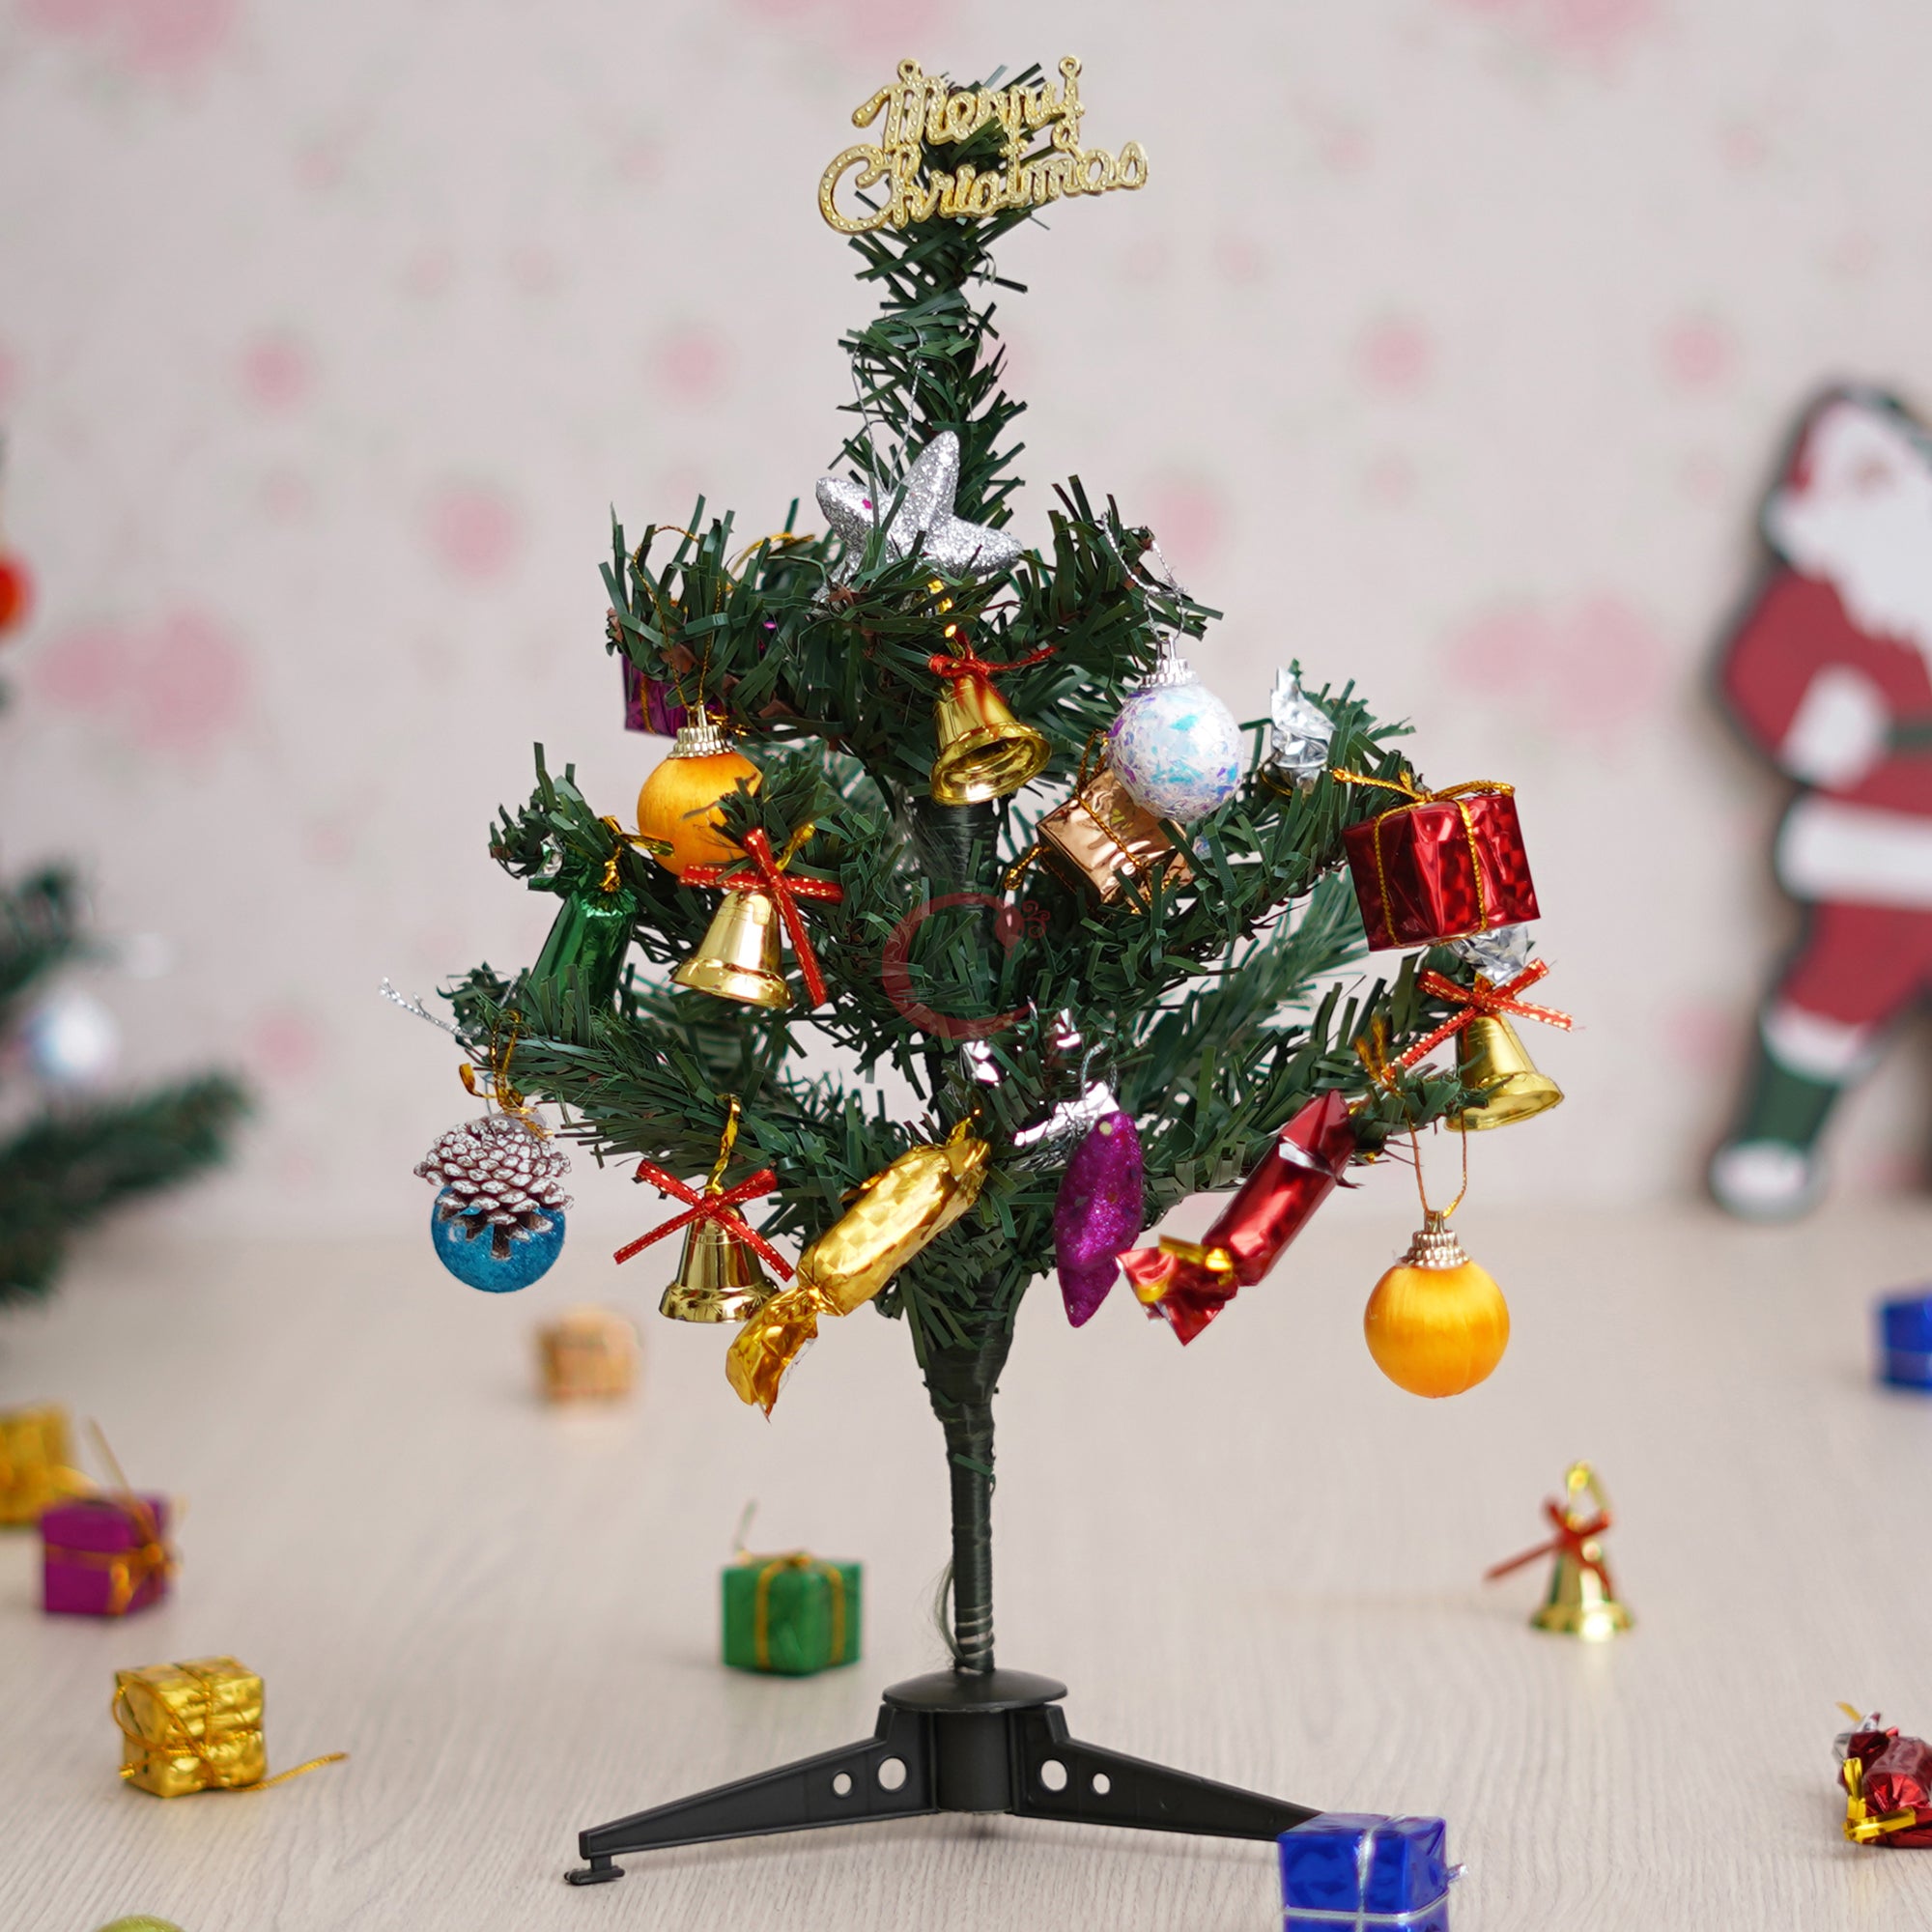 eCraftIndia 1 Feet Green Artificial Christmas Tree Xmas Pine Tree with Stand and 40 Christmas Decoration Ornaments Props - Merry Christmas Decoration Item for Home, Office, and Church 1